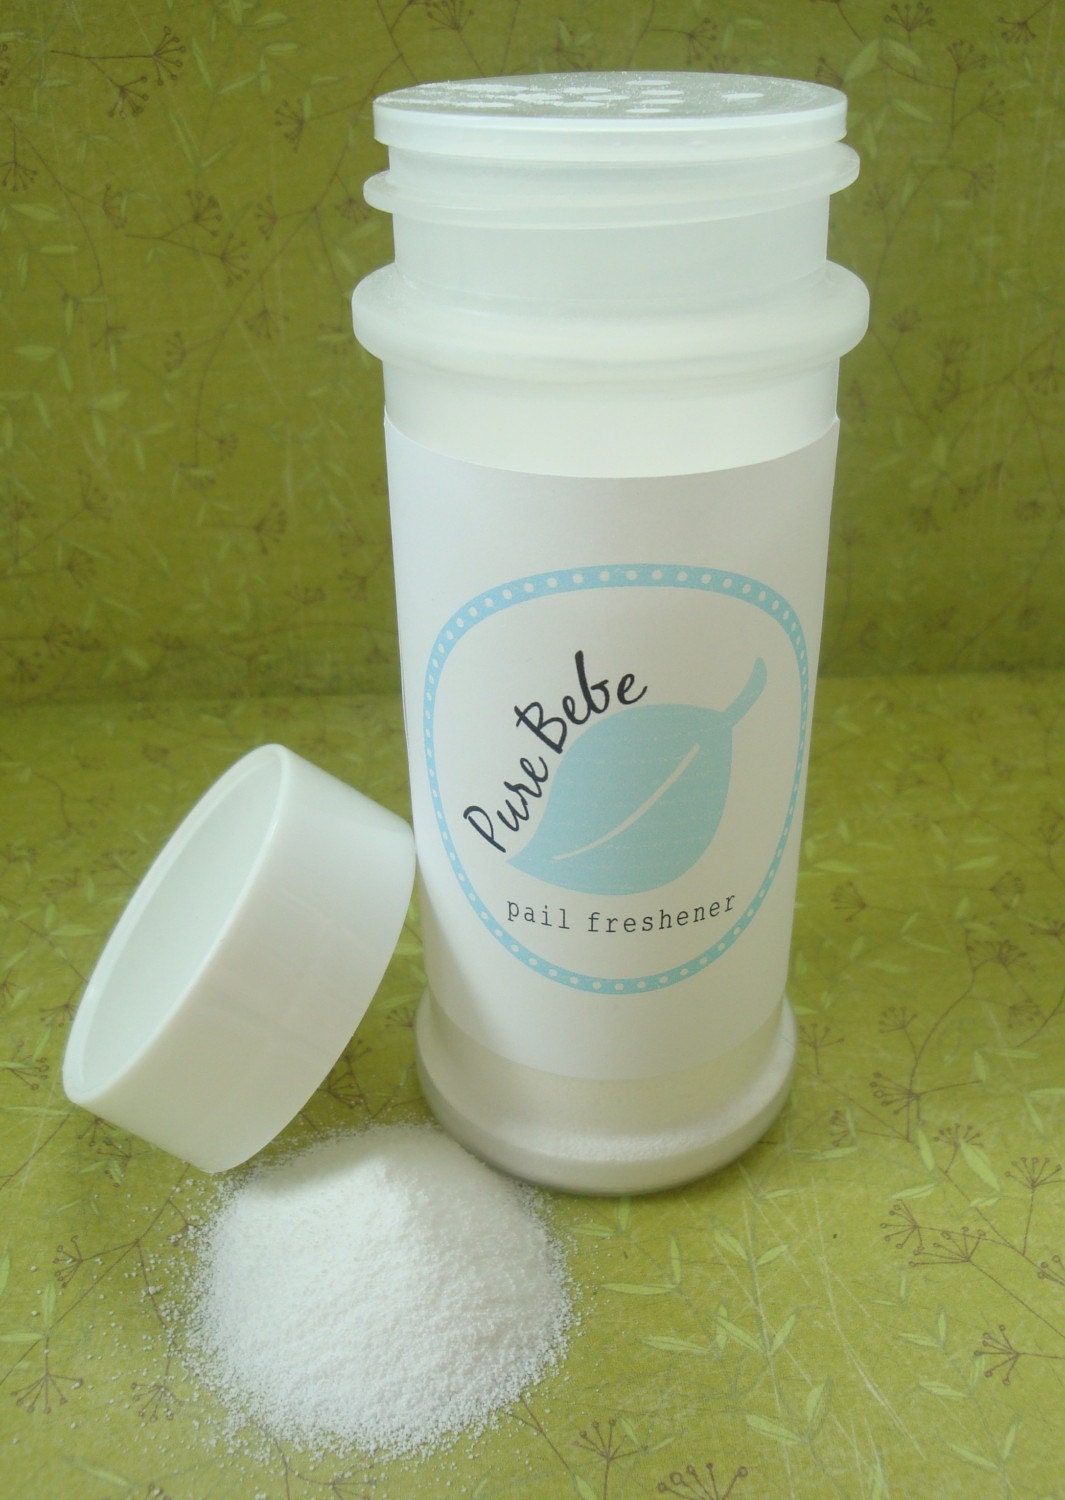 PureBebe  Pail Freshener - Deodorize and Freshen your diaper pail - available in 34 scents - 7 oz.